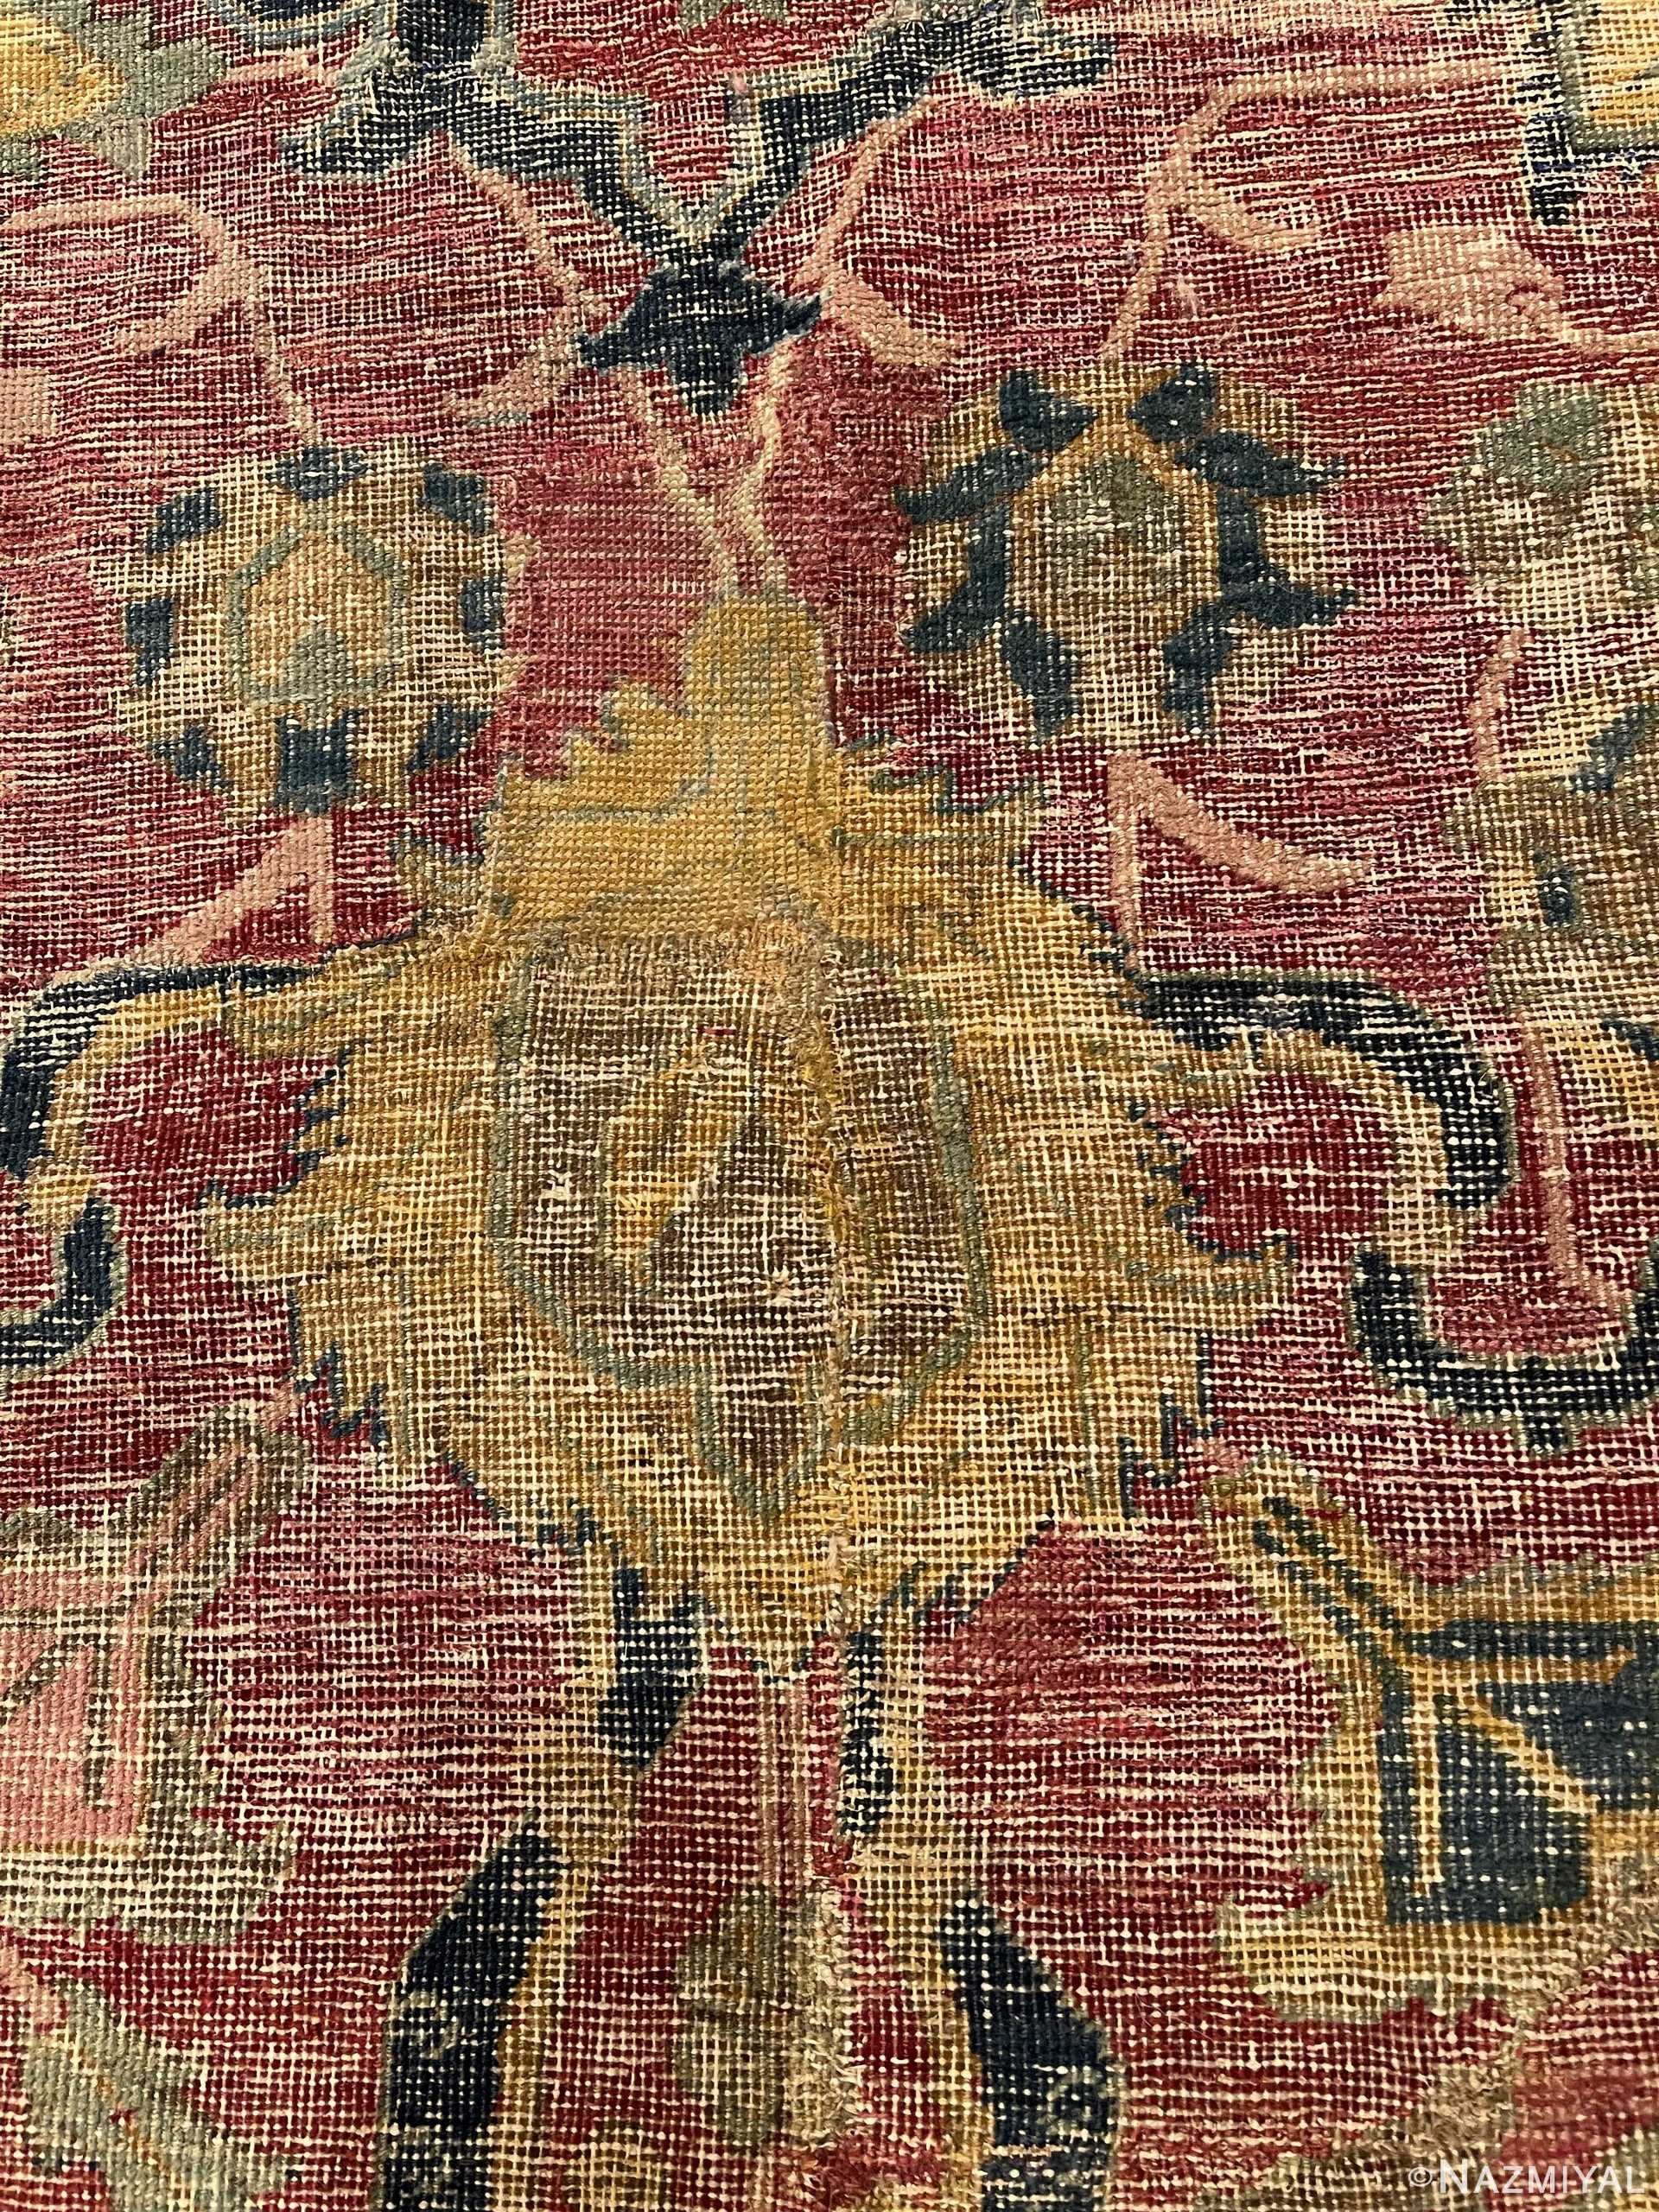 Close Up Of Rare 17th Century Large Antique Persian Isfahan Rug 70804 by Nazmiyal Antique Rugs